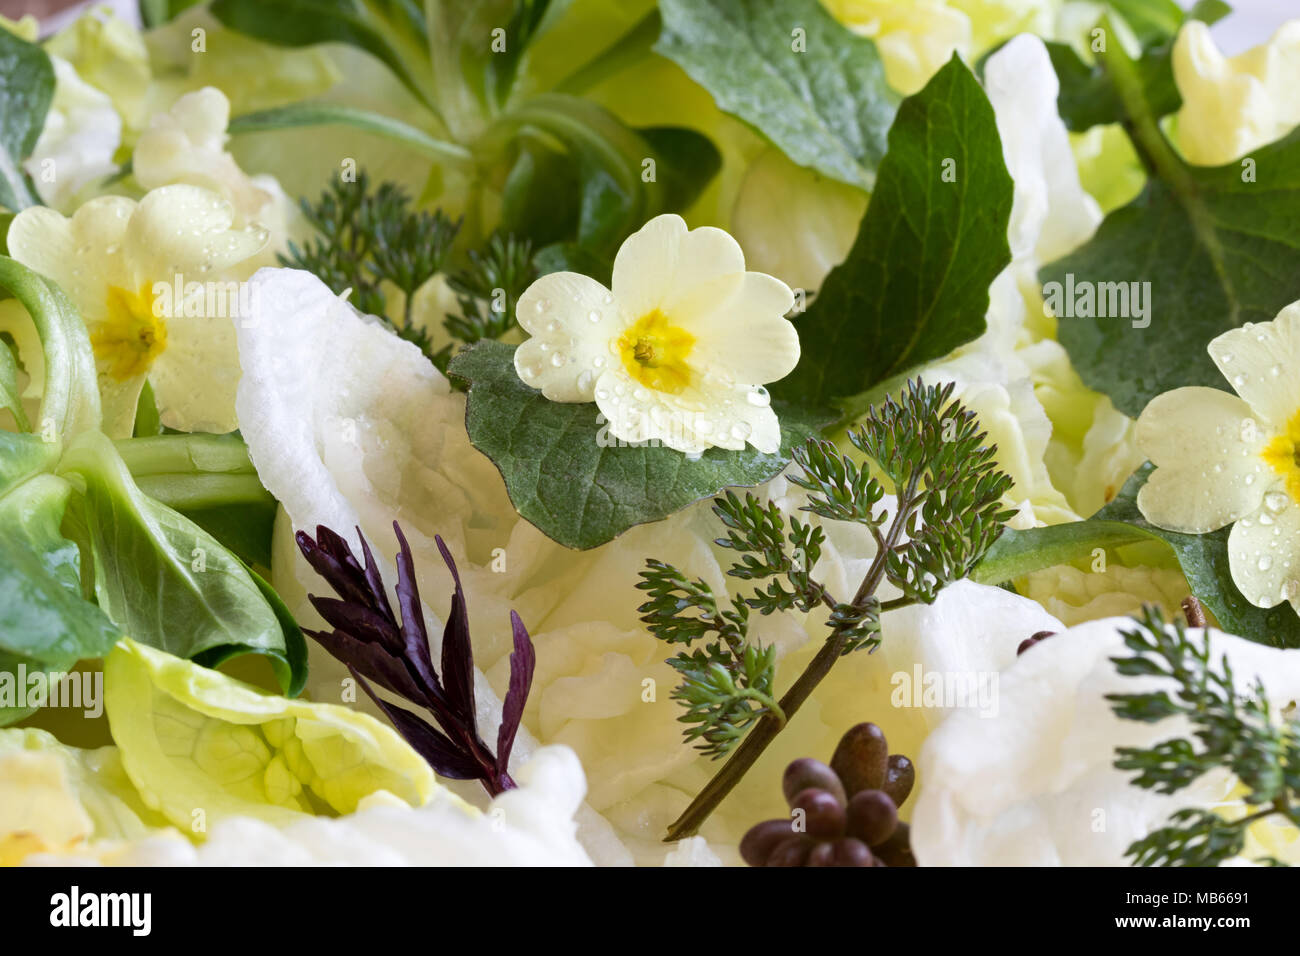 Detail of a spring salad with primula flowers, young nipplewort leaves and other wild edible plants Stock Photo